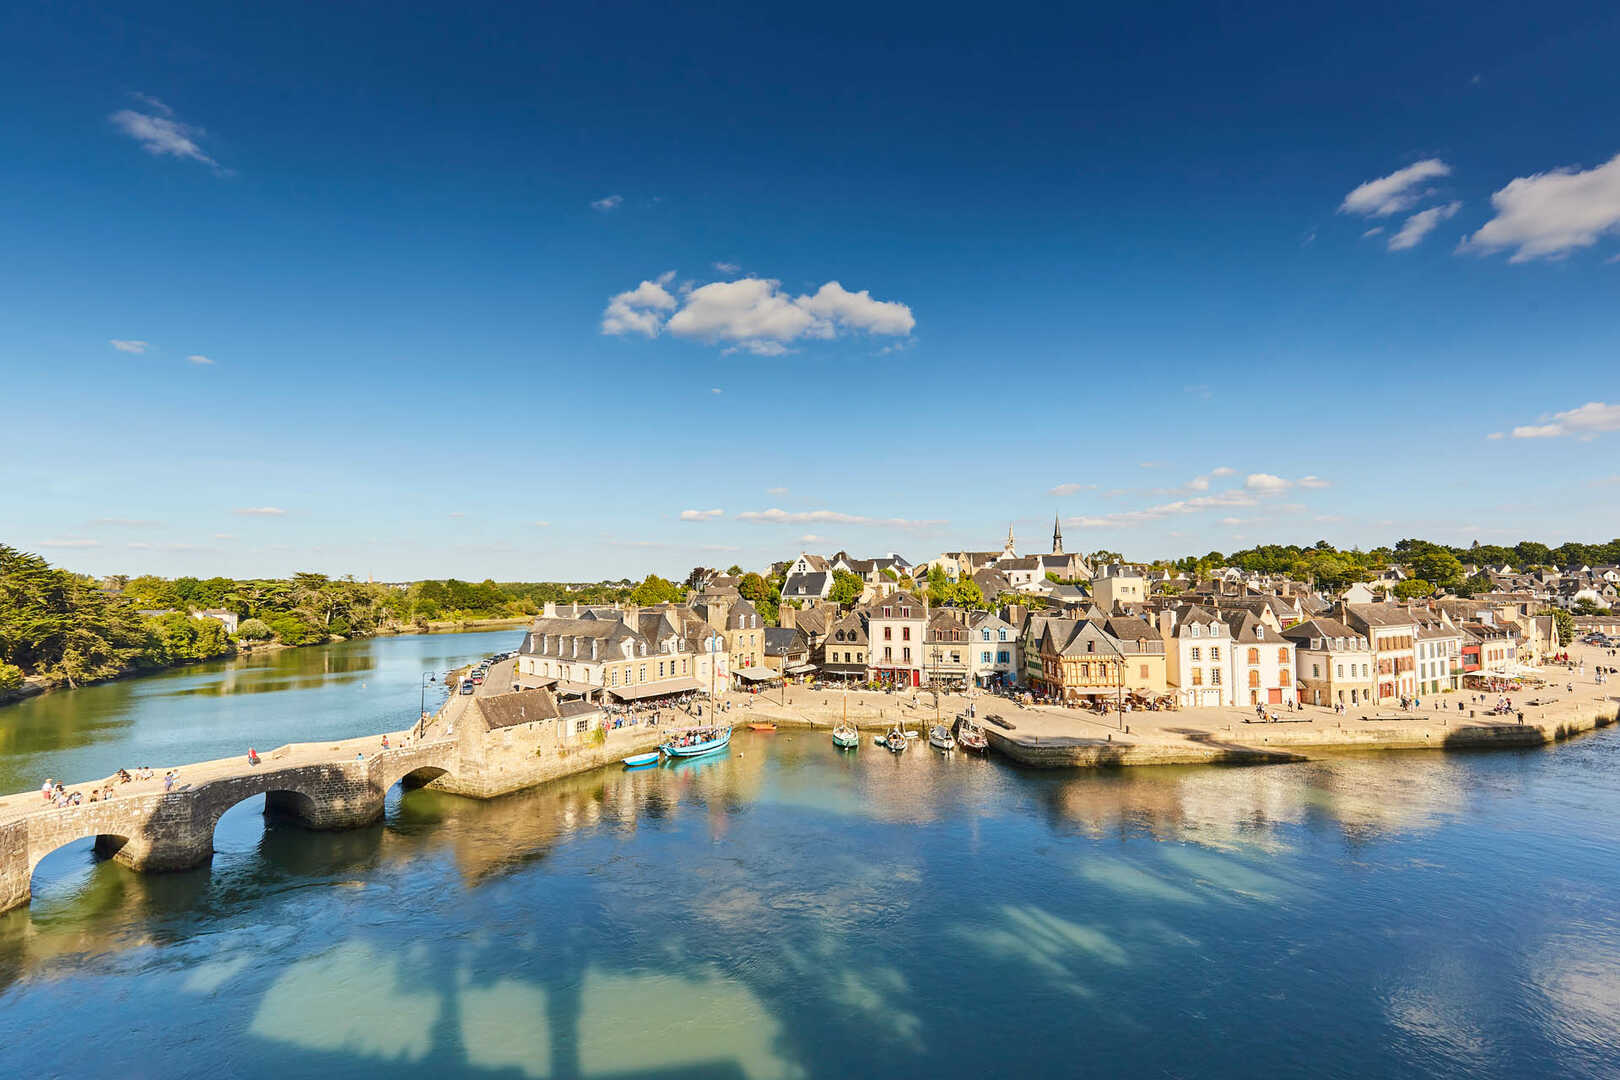 Auray, a medieval city of character and home to the port of